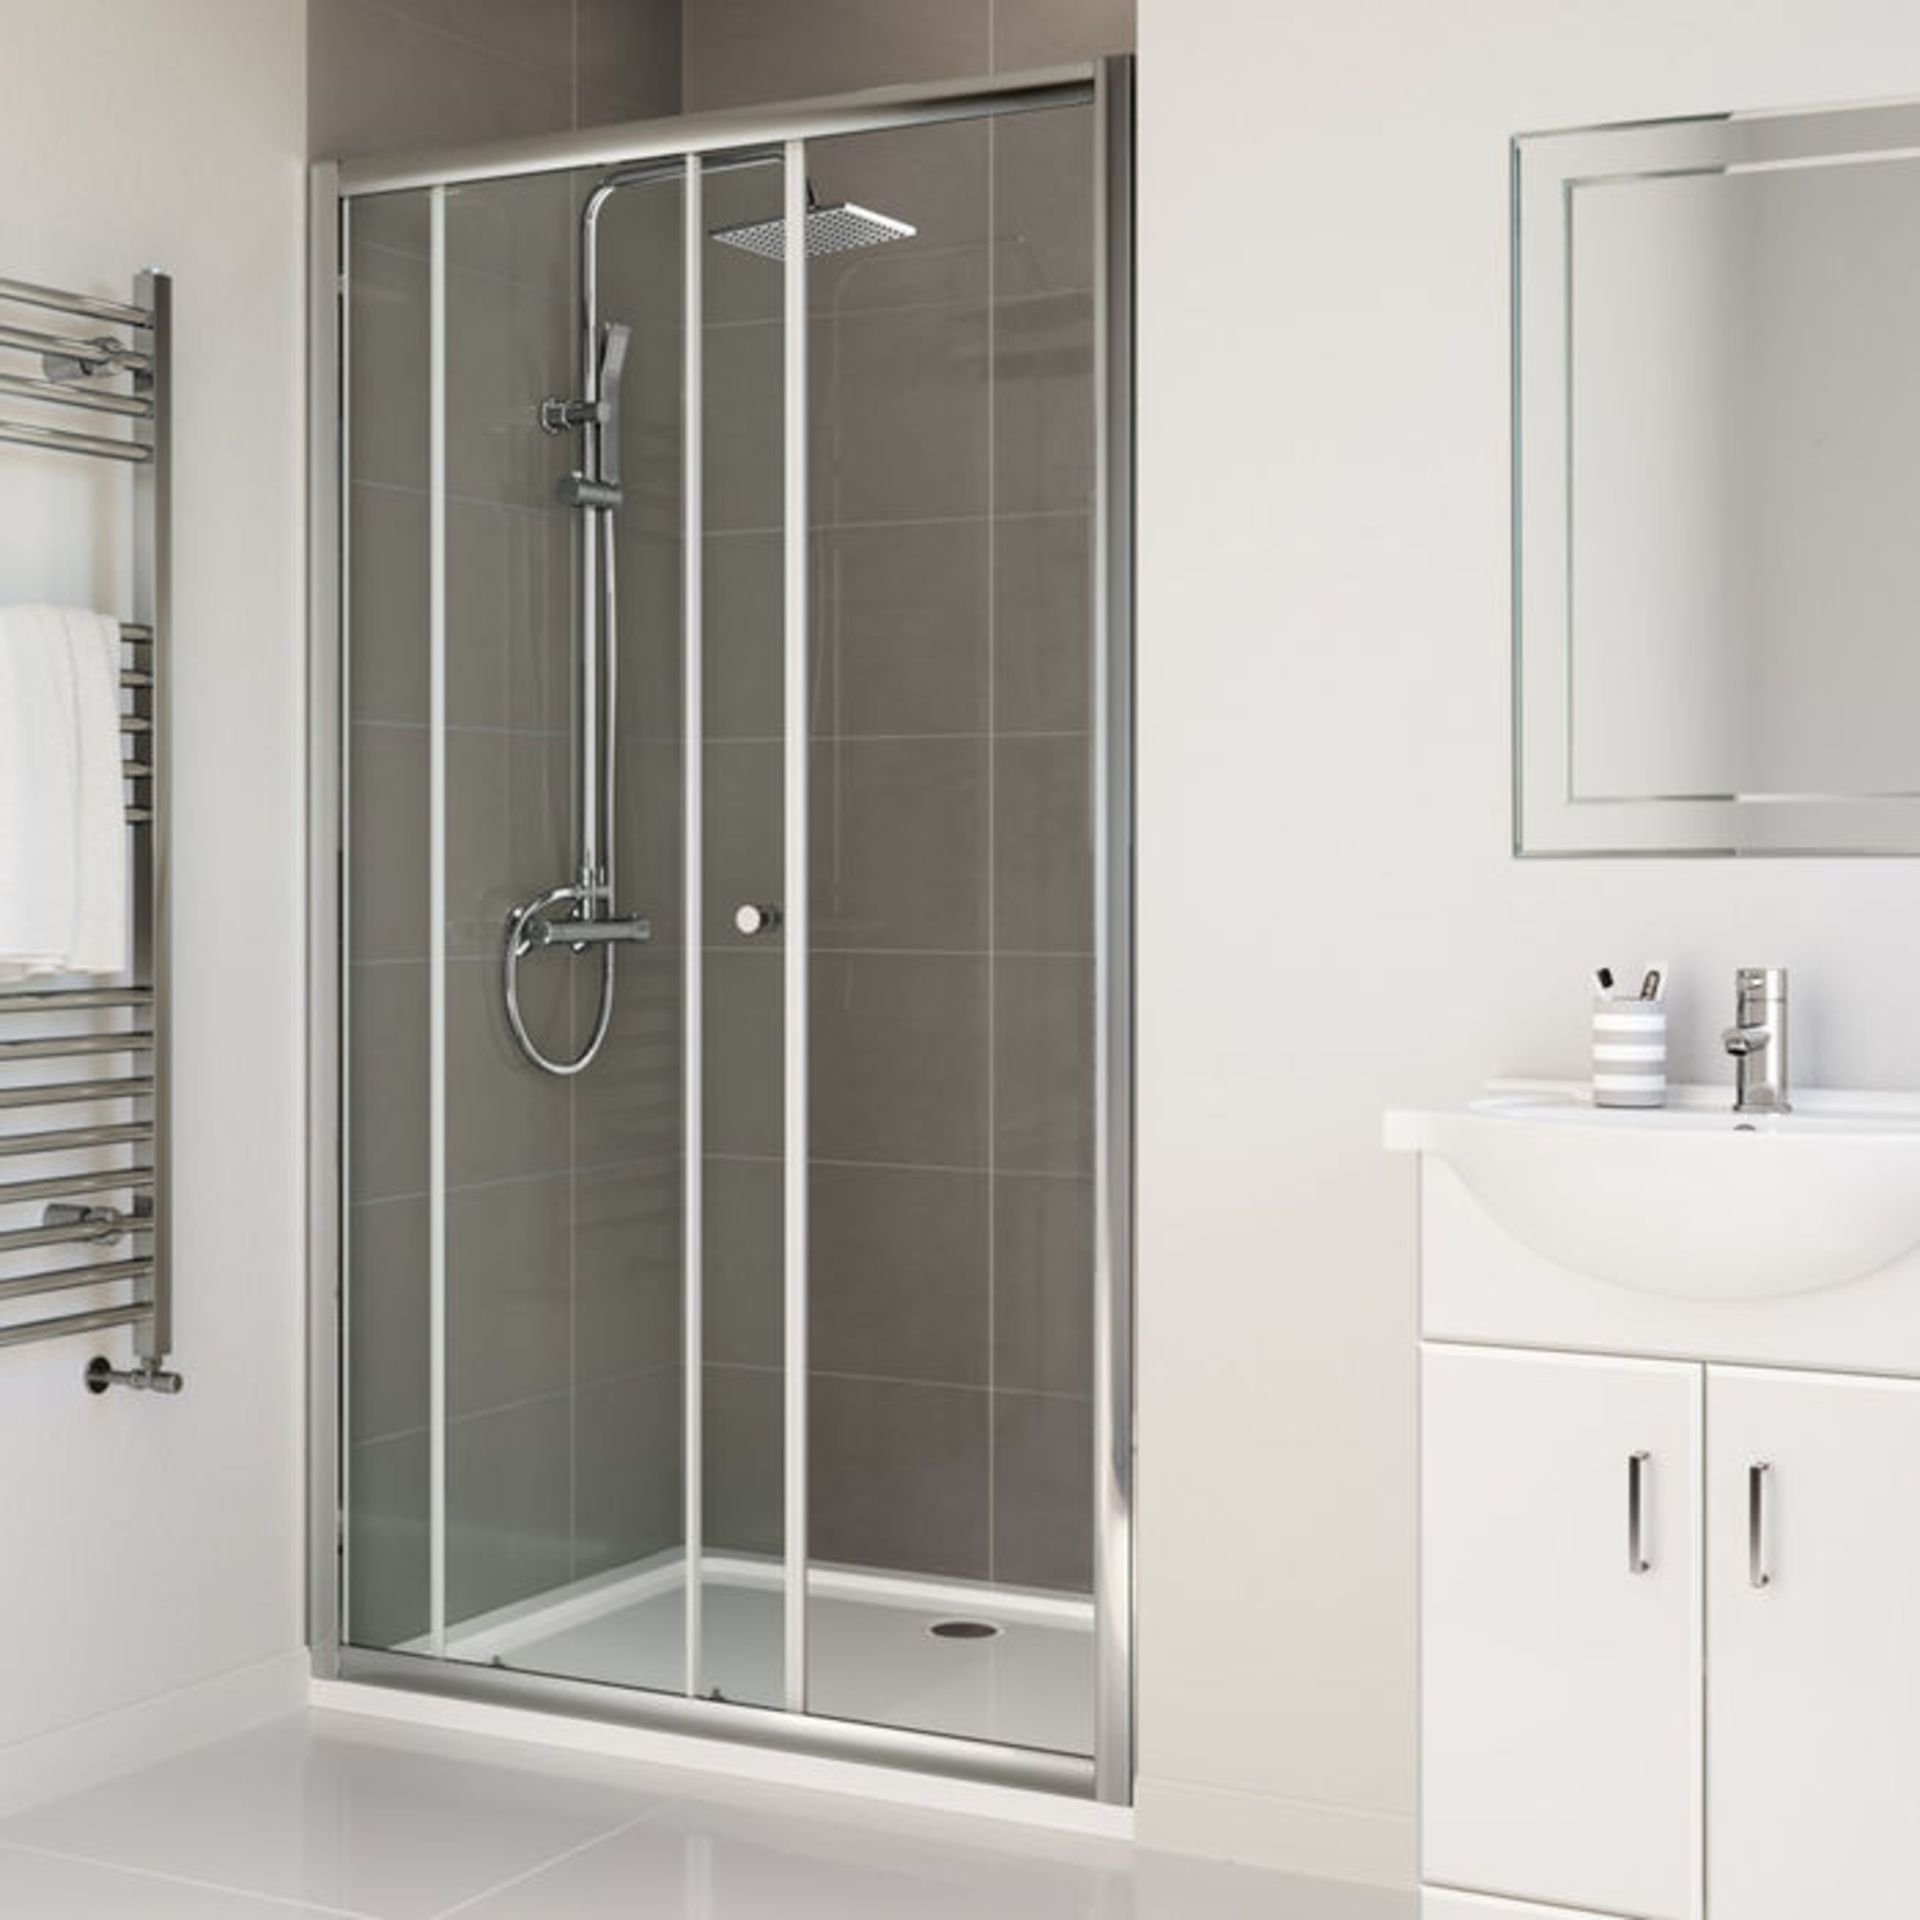 (PO75) 1000mm - Elements Sliding Shower Door. RRP £299.99.4mm Safety GlassFully waterproof tested - Image 2 of 3